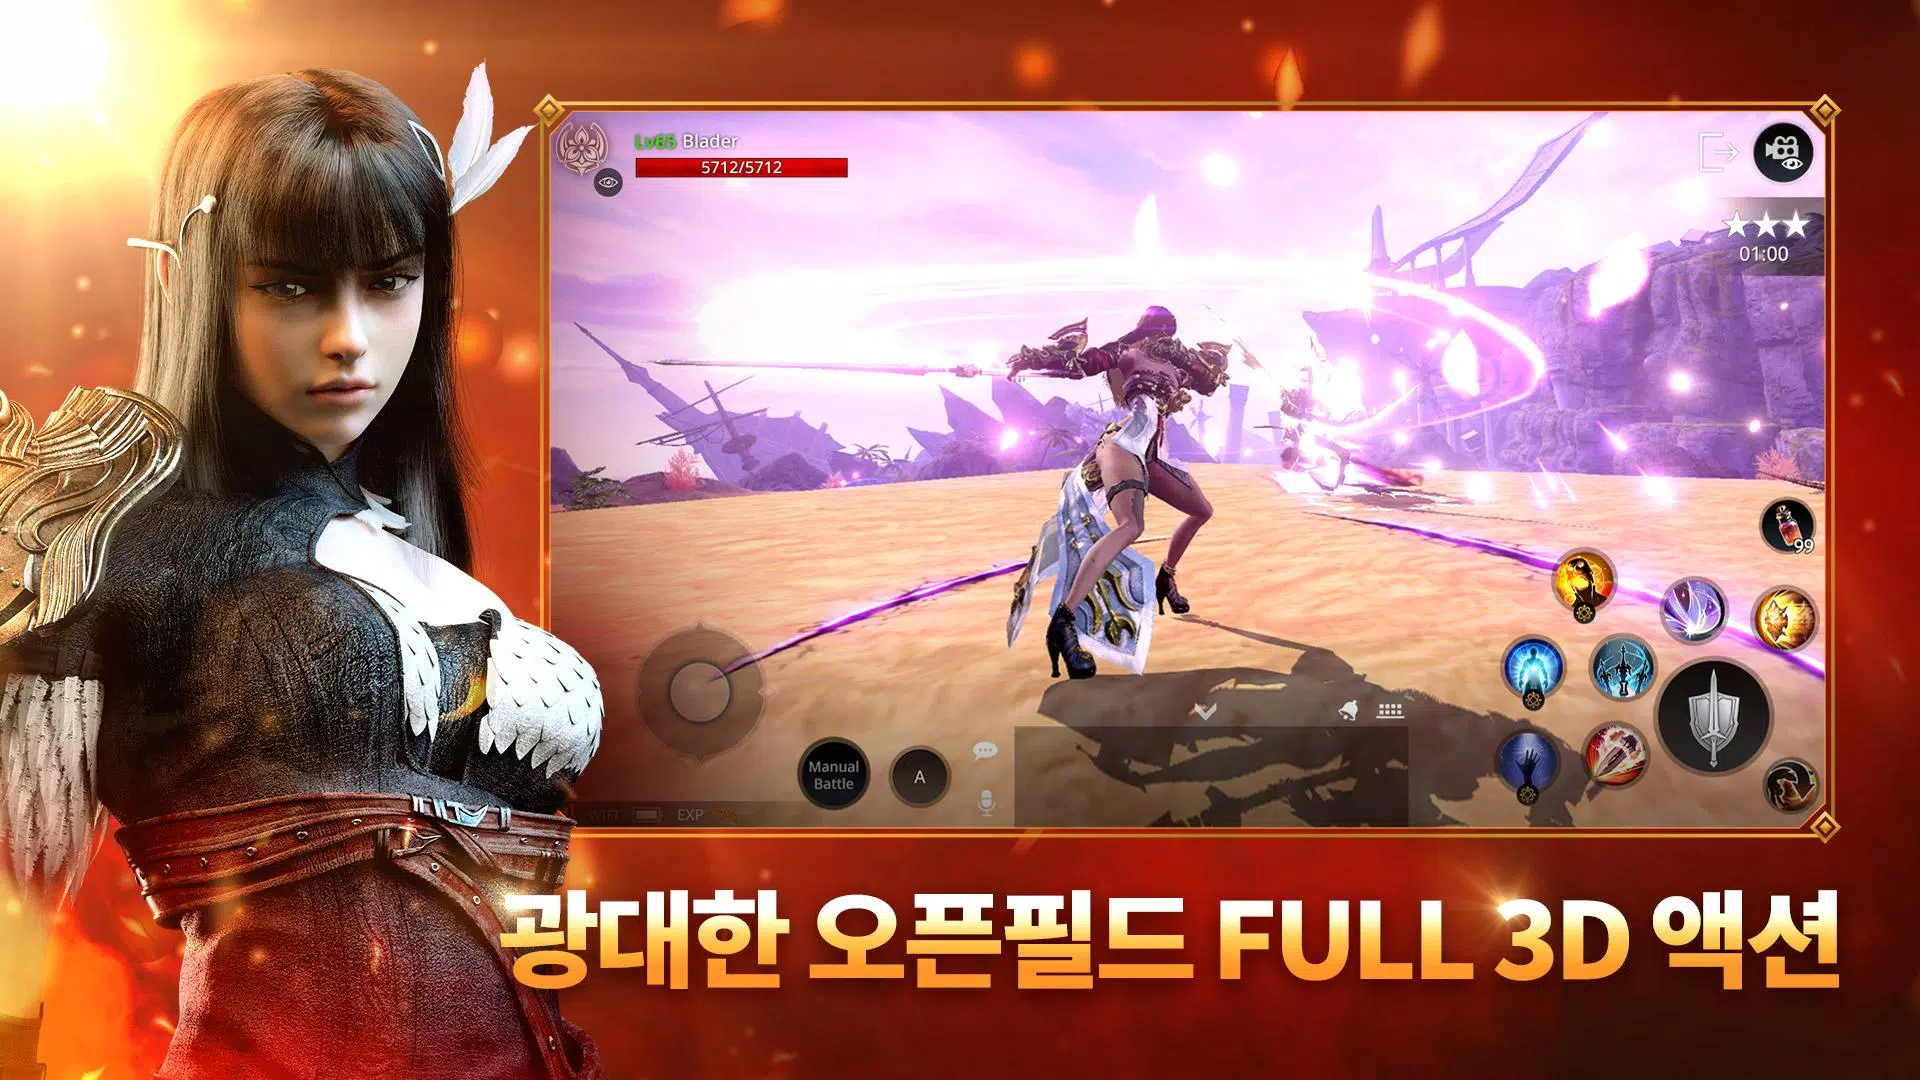 AxE Alliance x Empire Blader Gameplay Android / iOS (KR) 